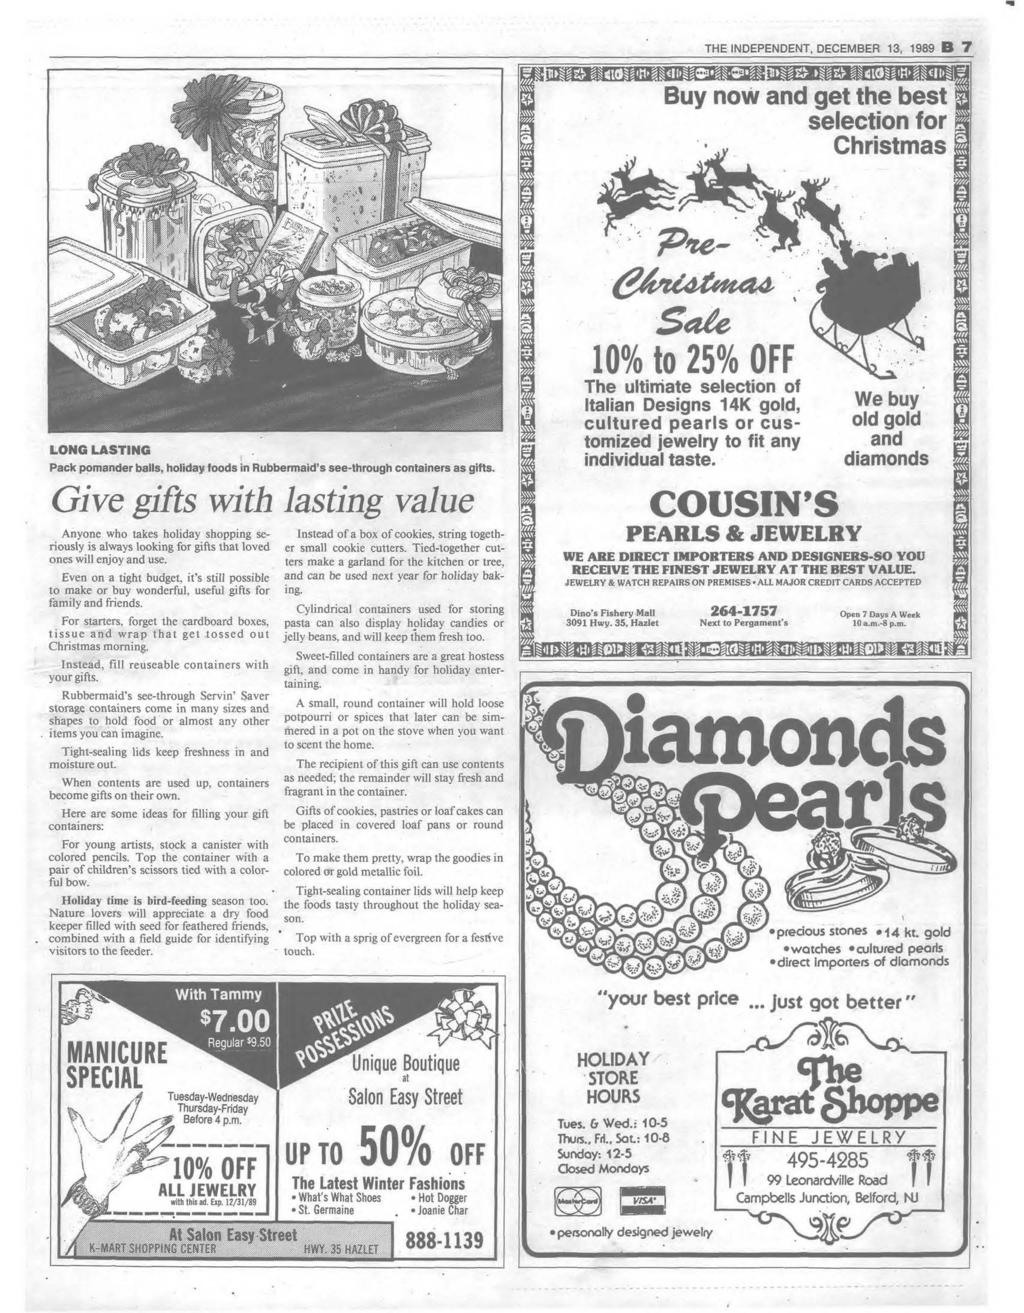 THE INDEPENDENT, DECEM BER 13, 1989 B 7 Buy now and get the best selection for Christmas 'P n e - L O N G L A S T I N G > Pack pomander balls, holiday foods in Rubbermaid s see-through containers as